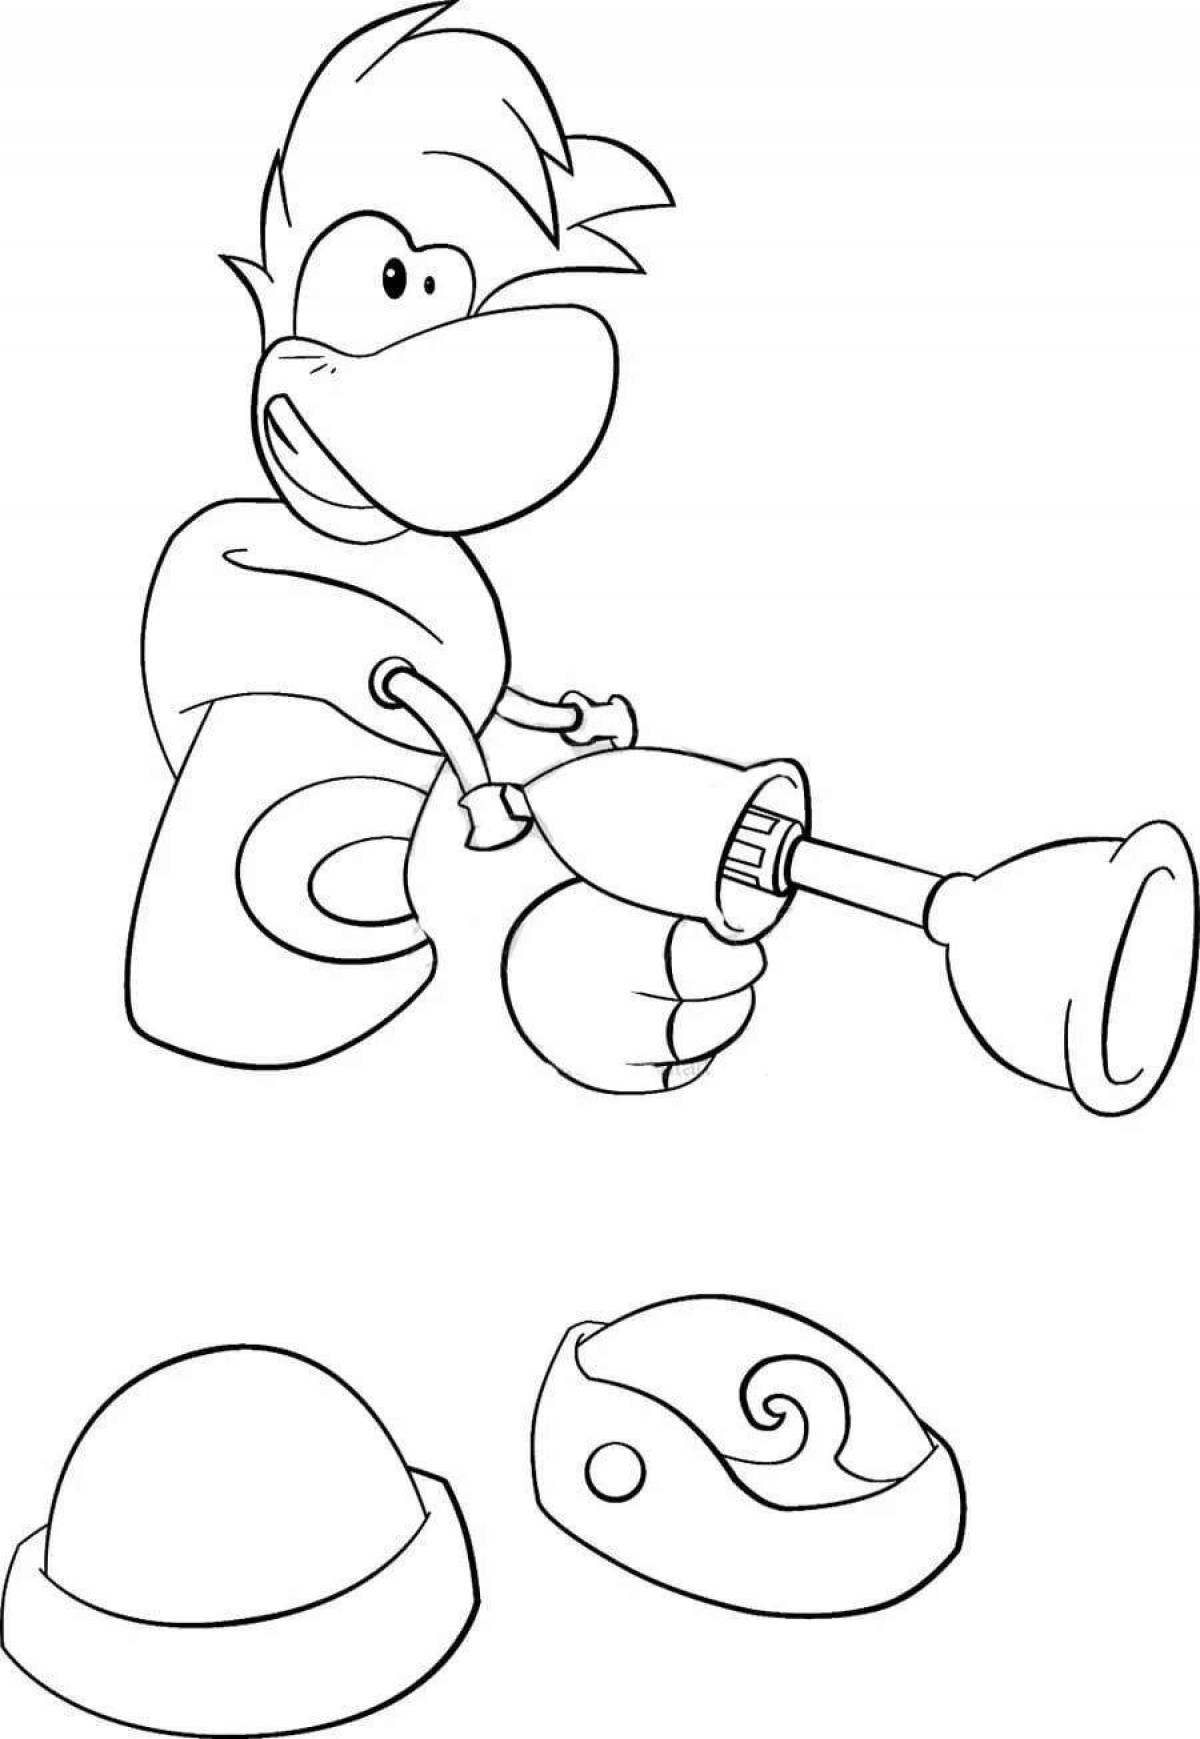 Rayman legends coloring pages